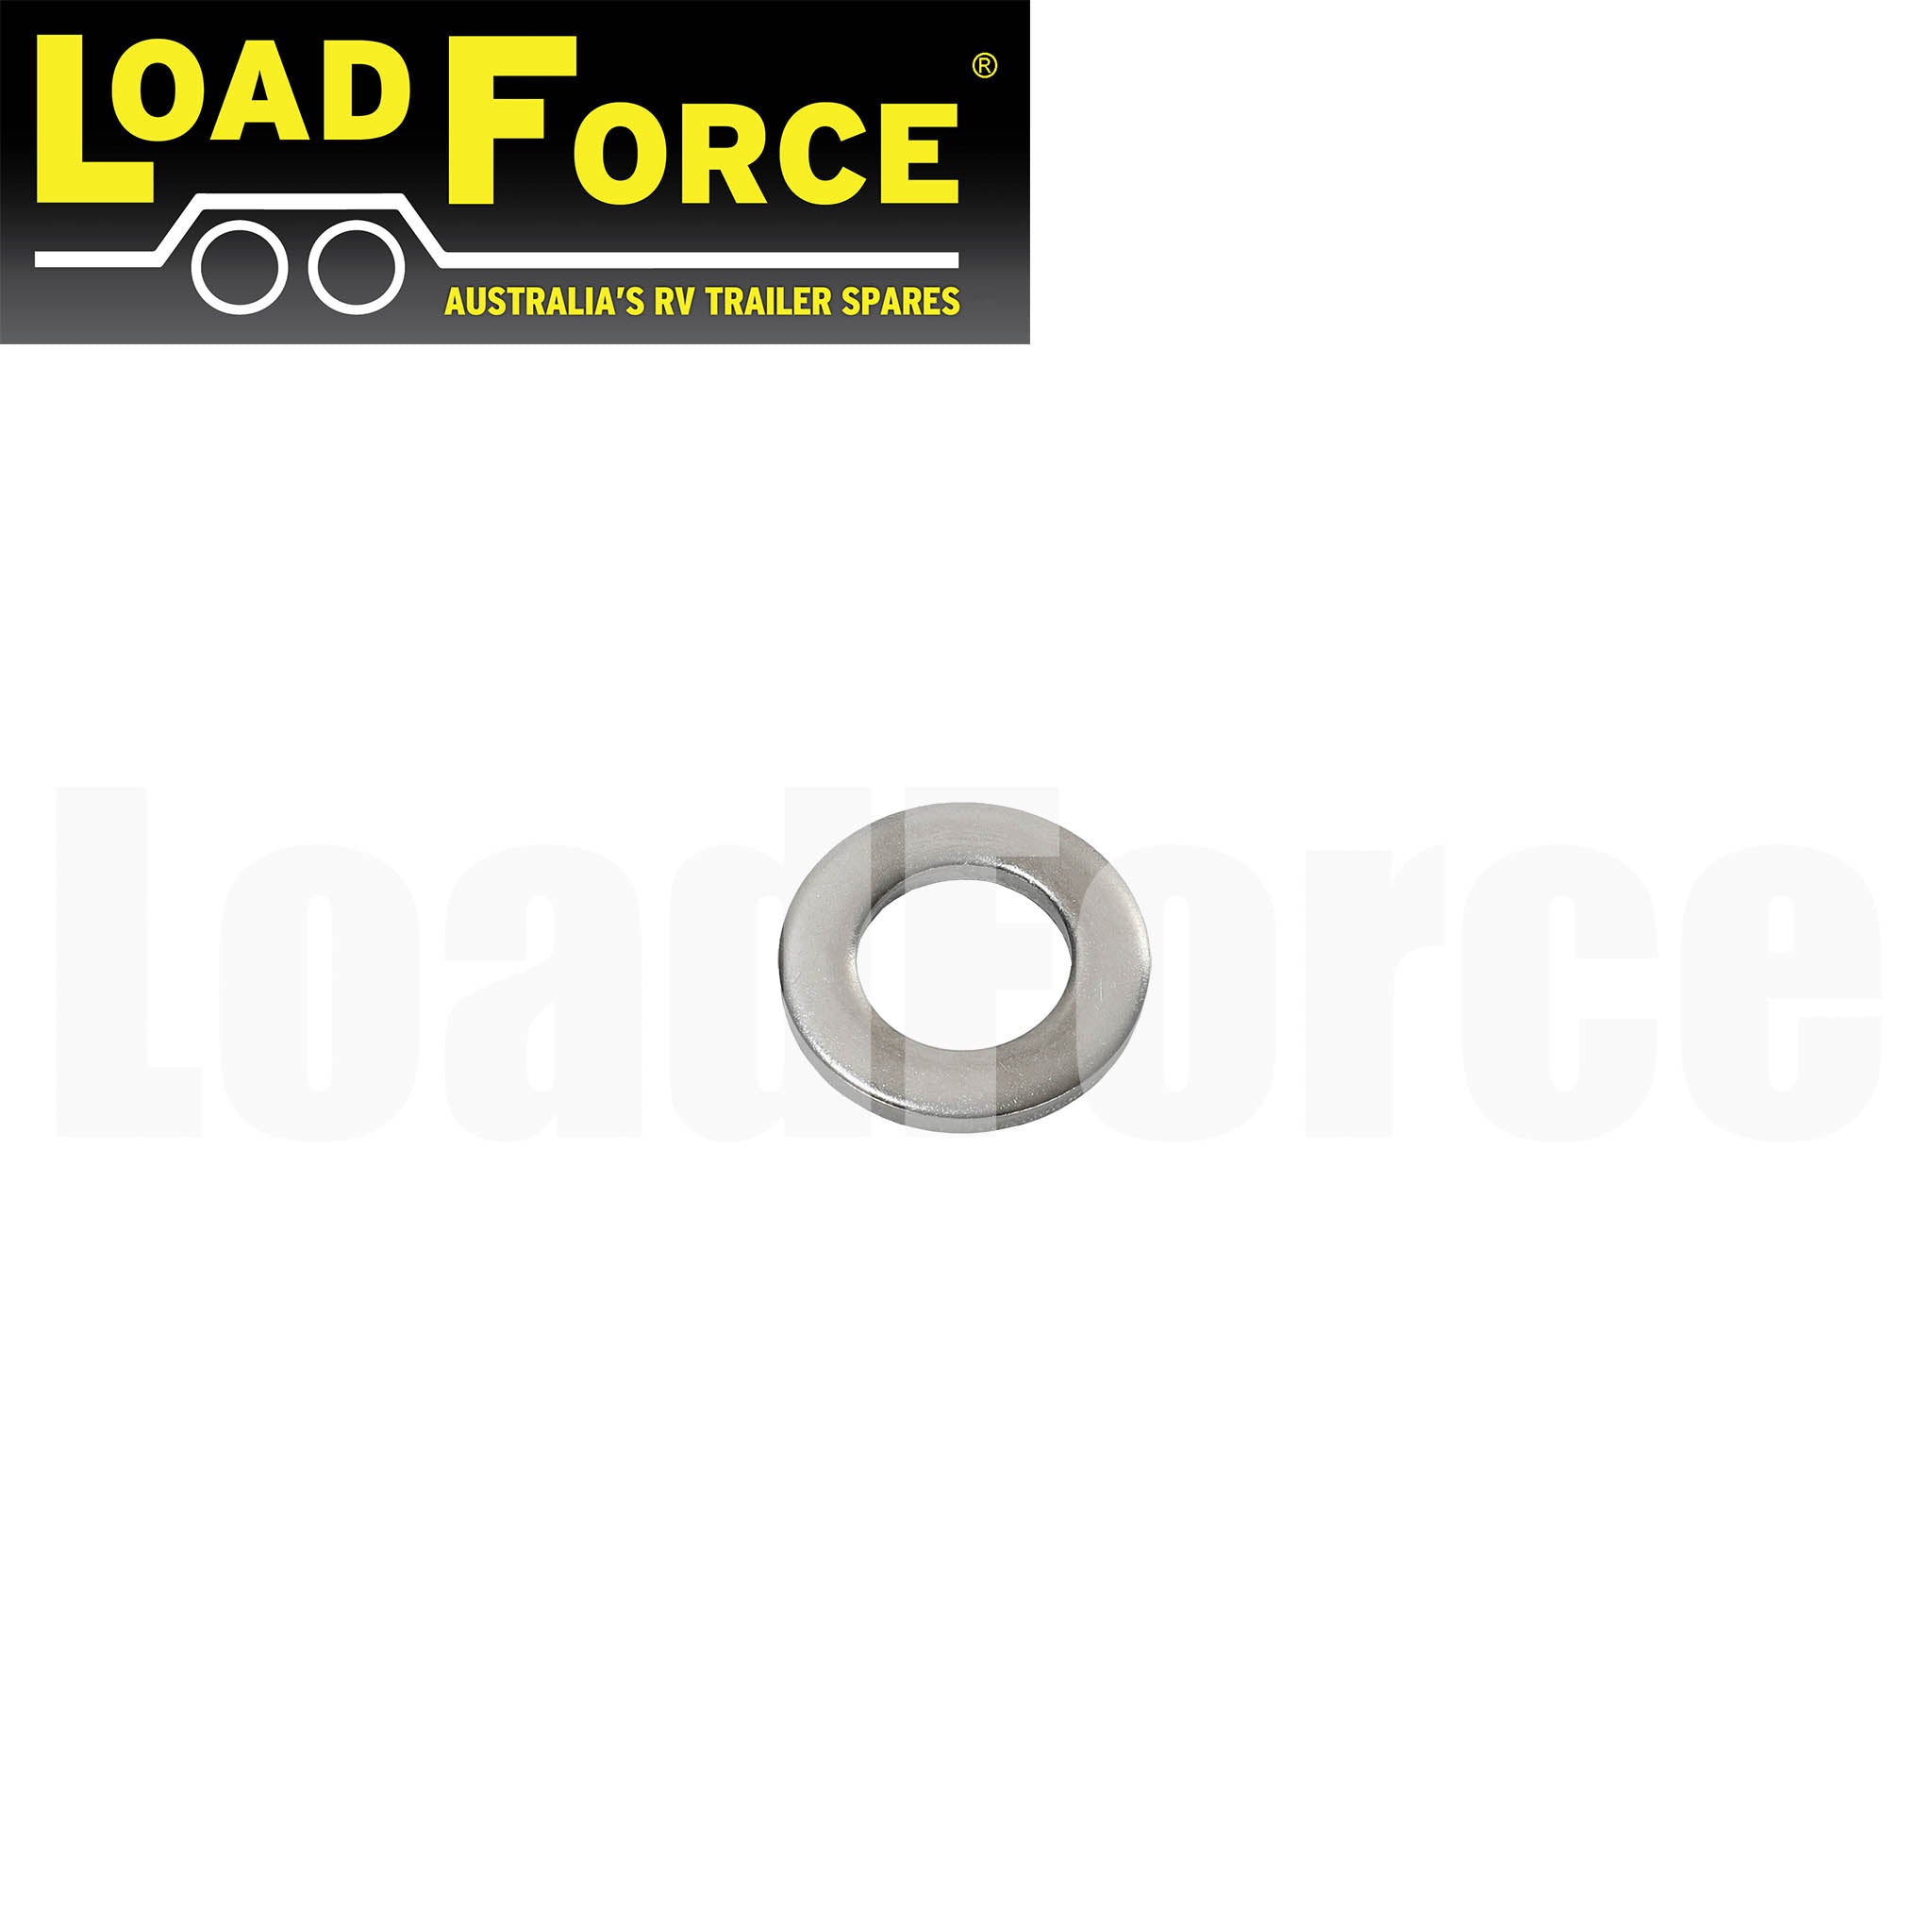 Boat Trailer Roller Spindle Washer Suit 18mm Stainless Steel